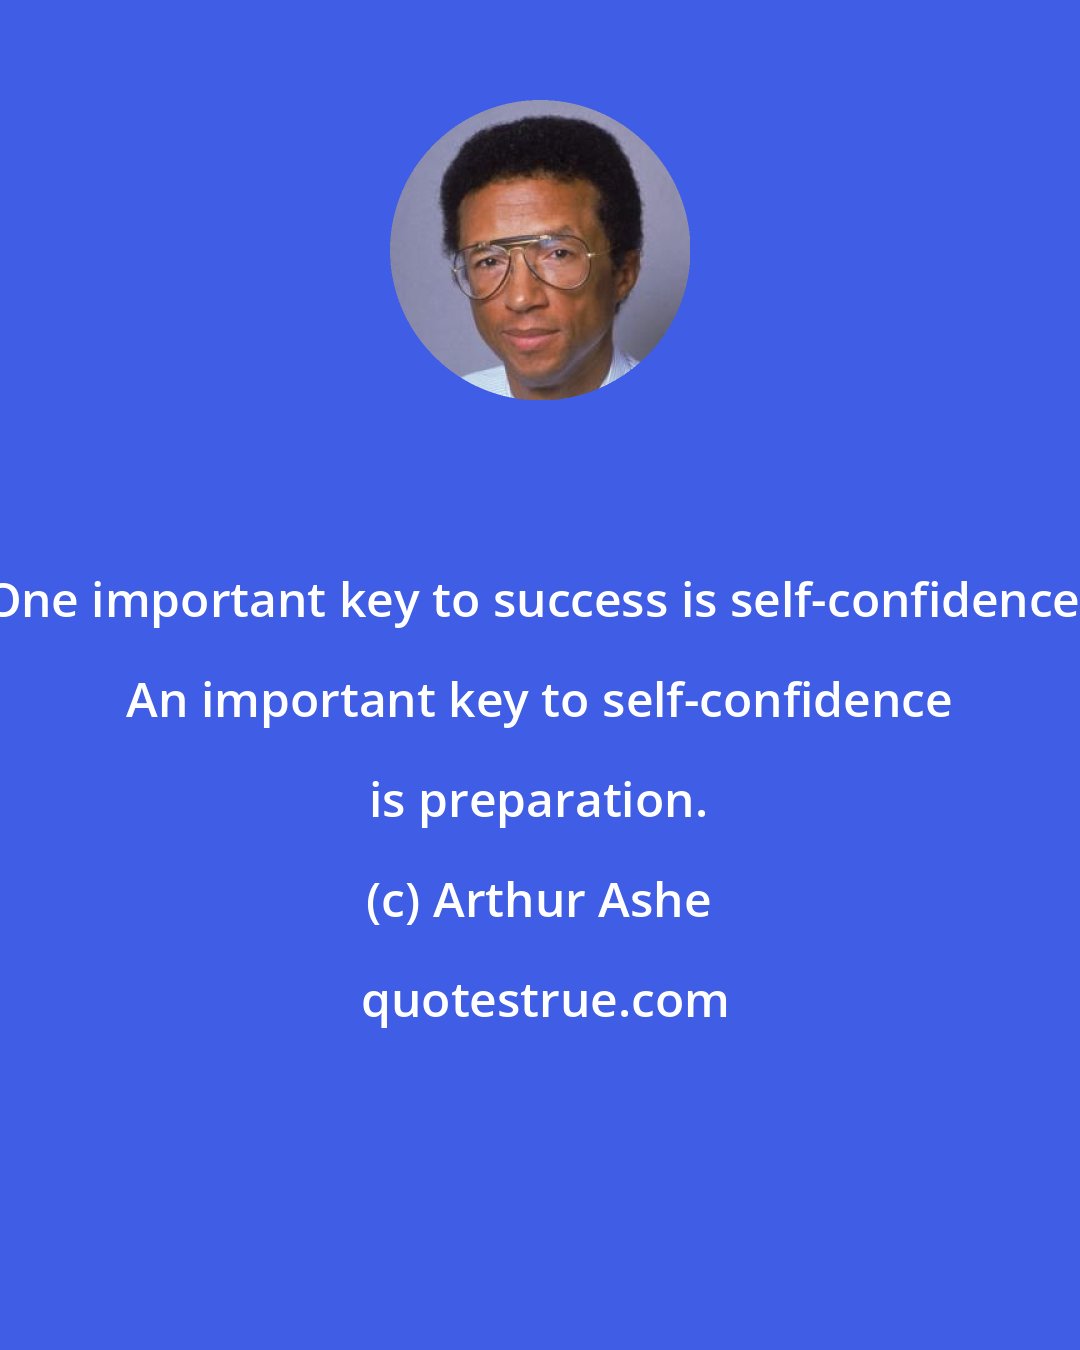 Arthur Ashe: One important key to success is self-confidence. An important key to self-confidence is preparation.